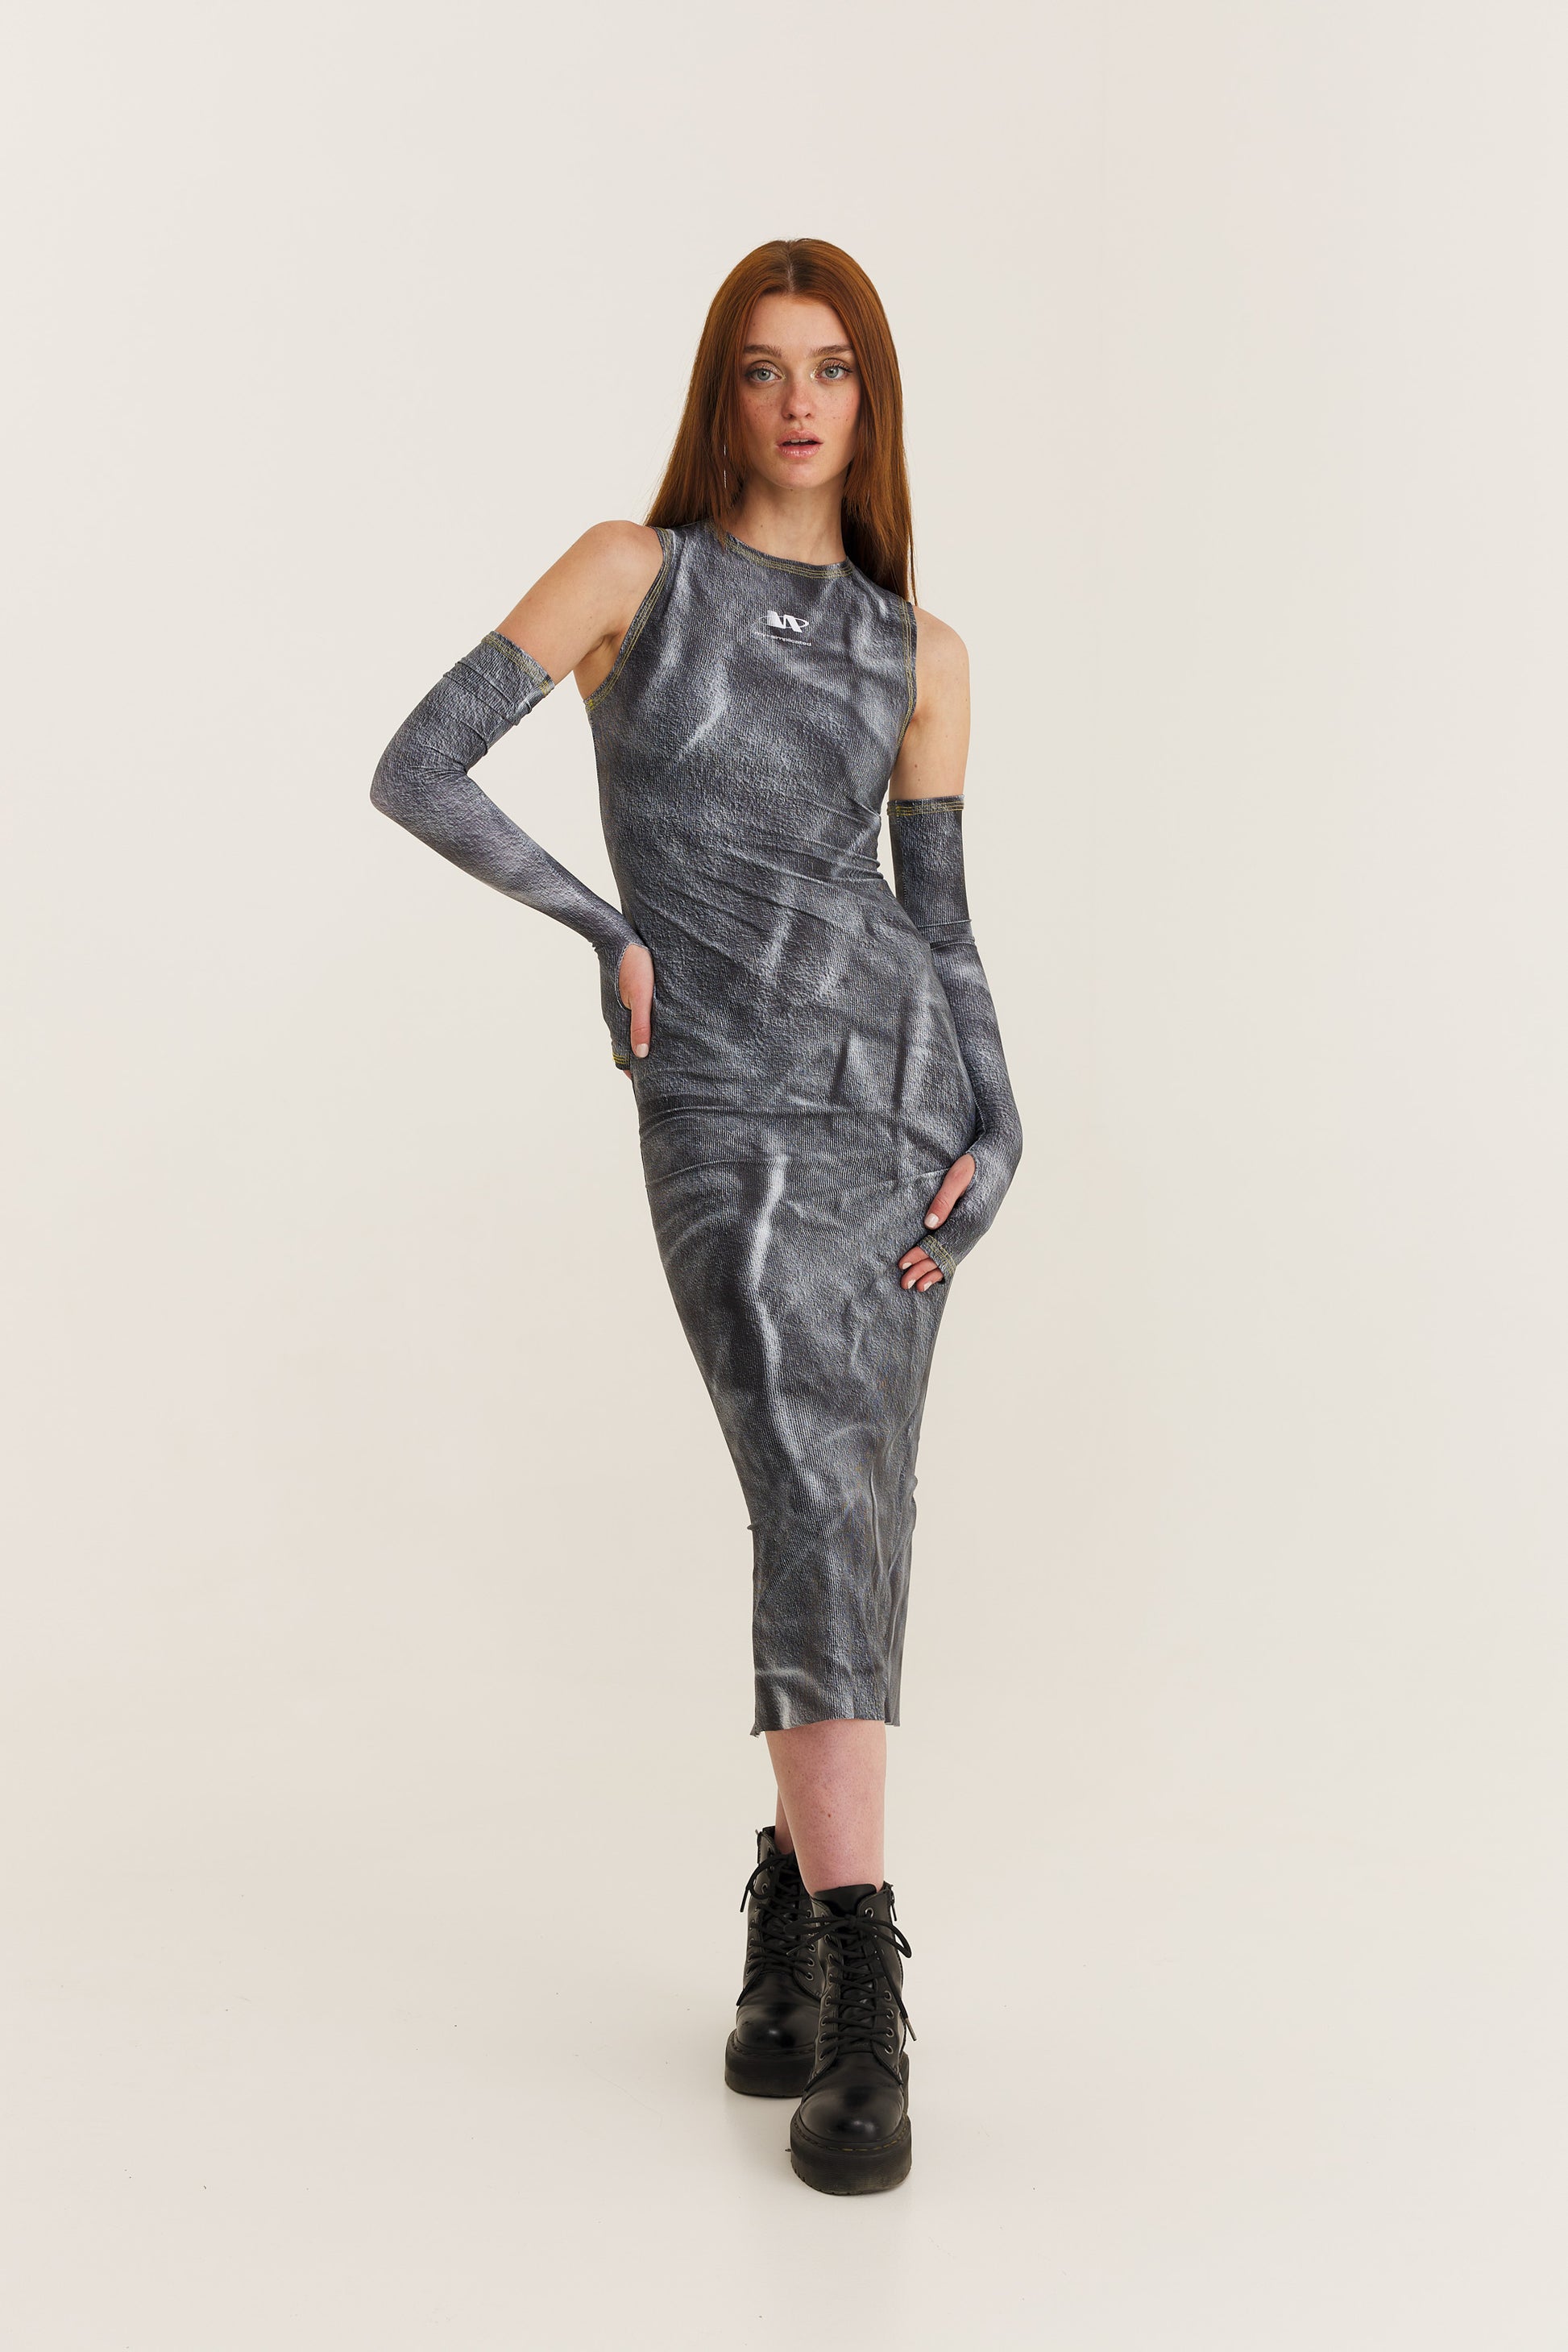 Wrinkled Second-Skin Dress with Gloves - mysimplicated